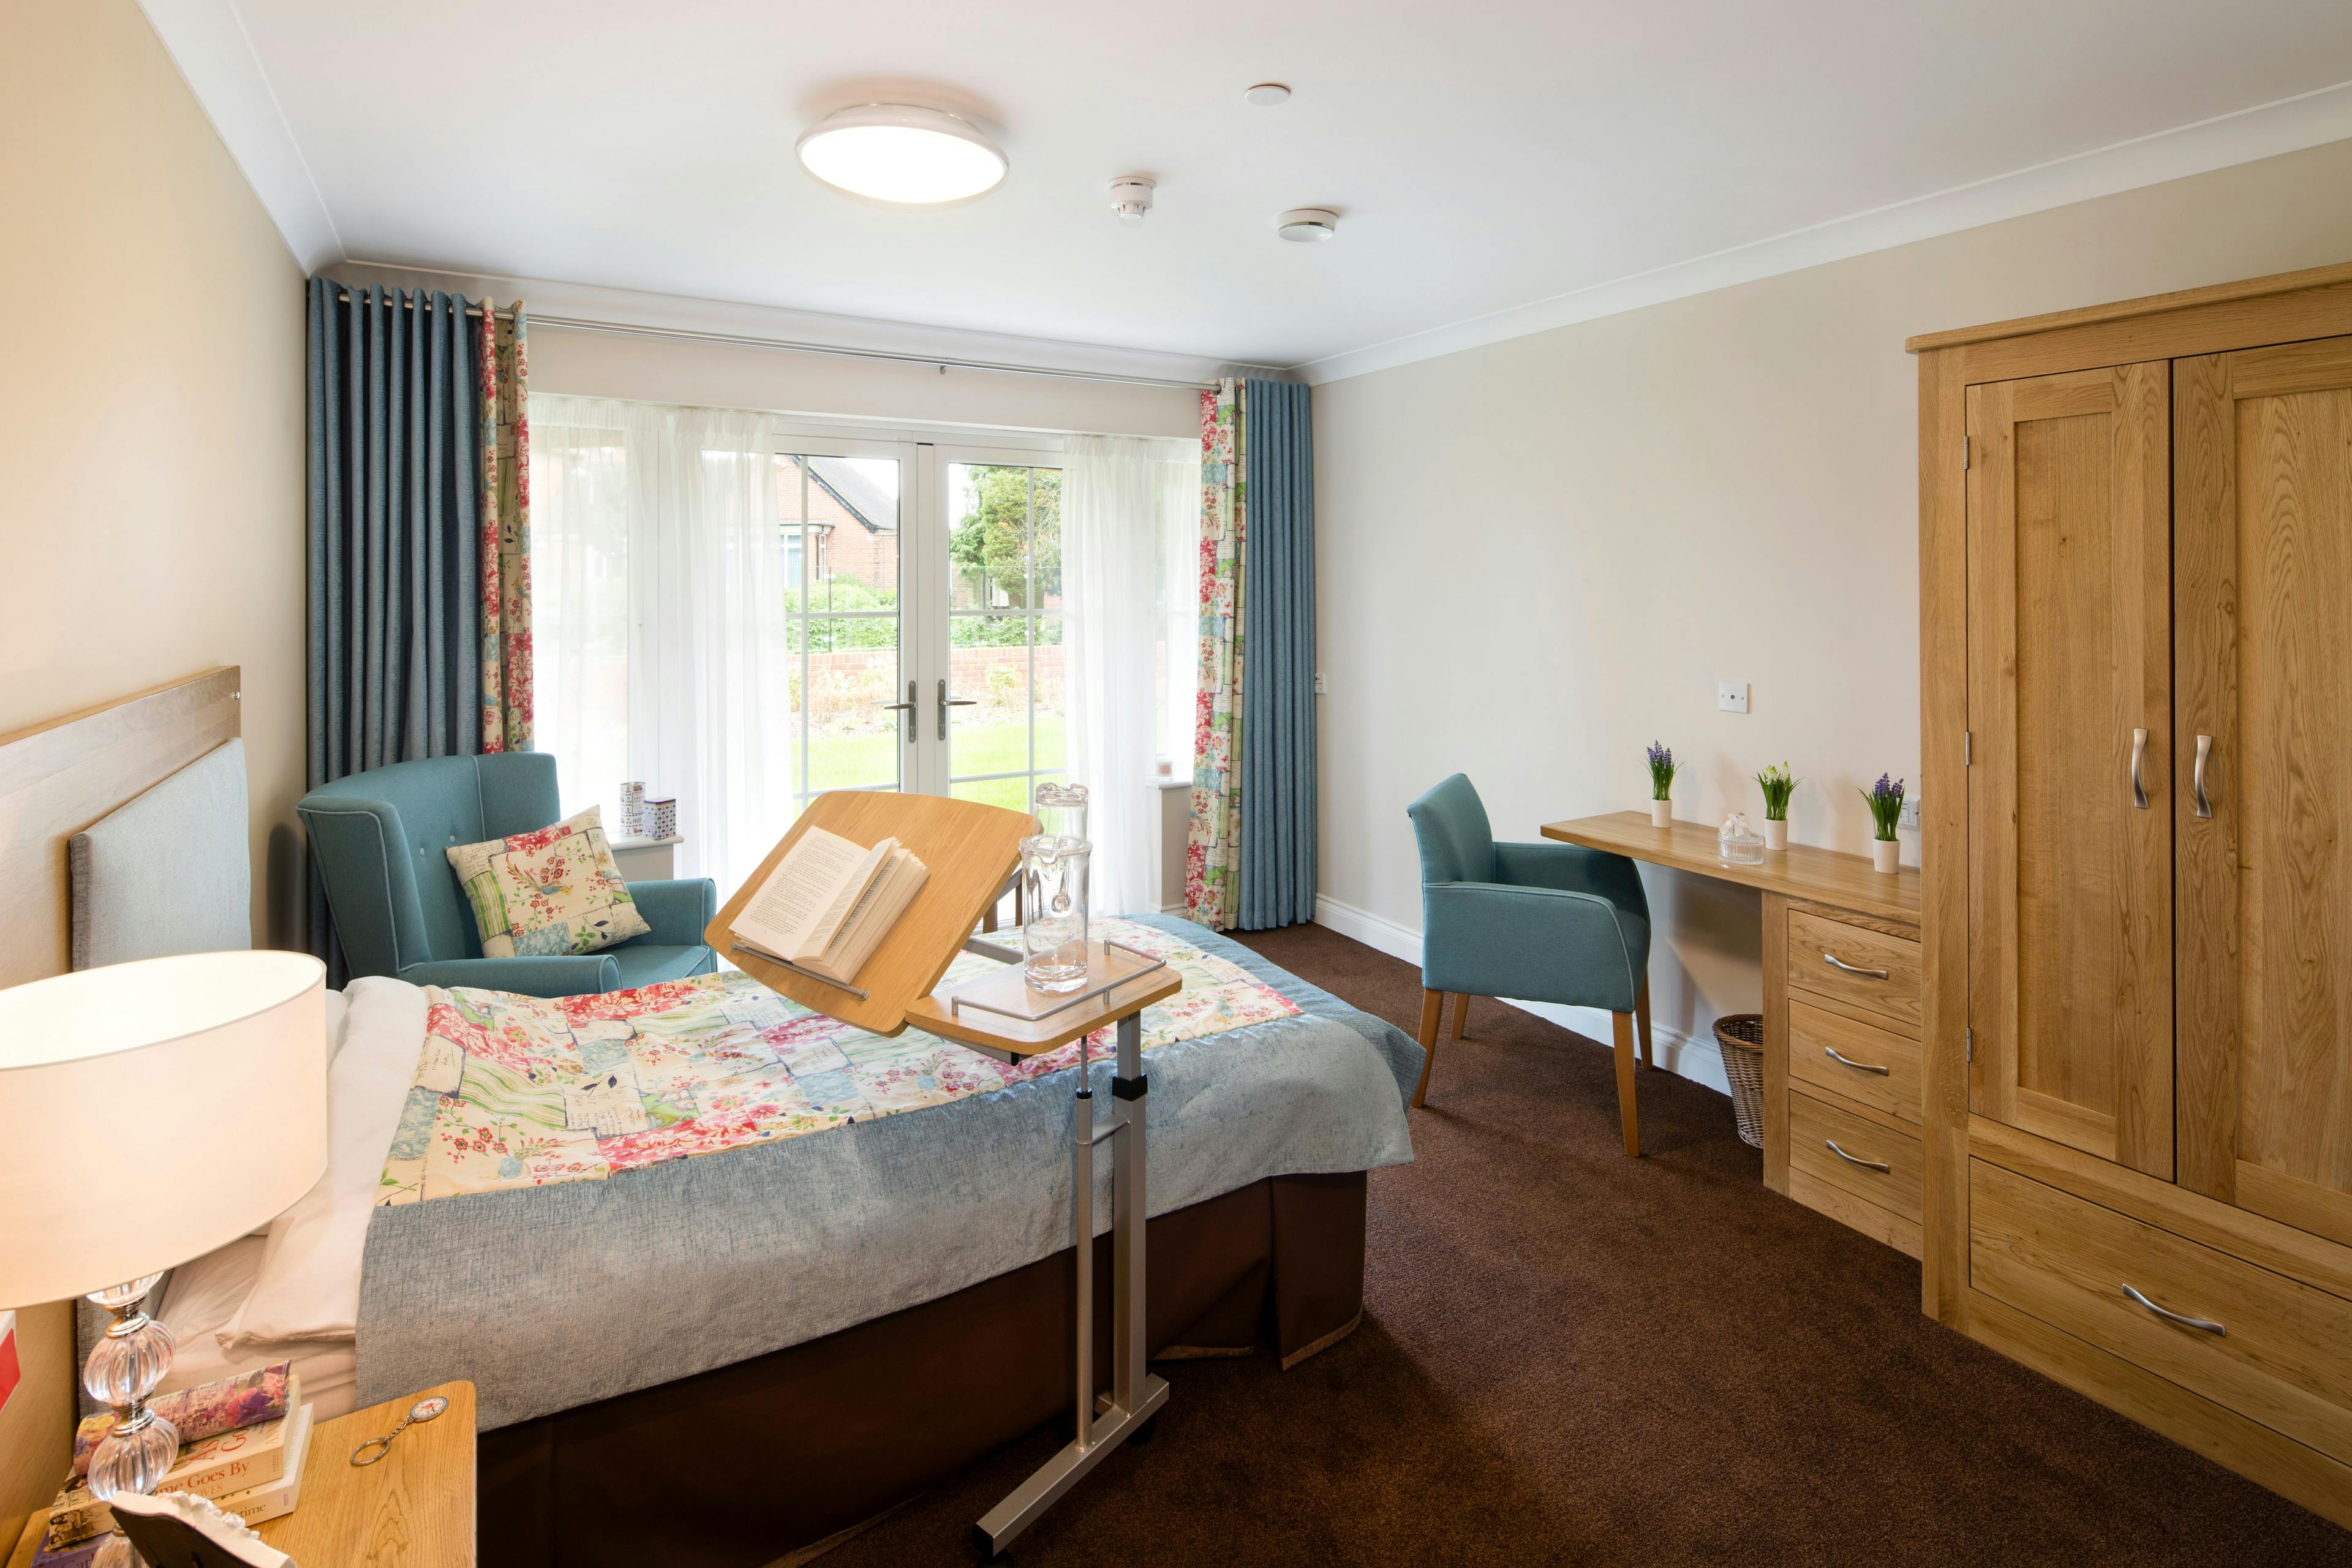 Porthaven Care Homes - Hartfield House care home 2